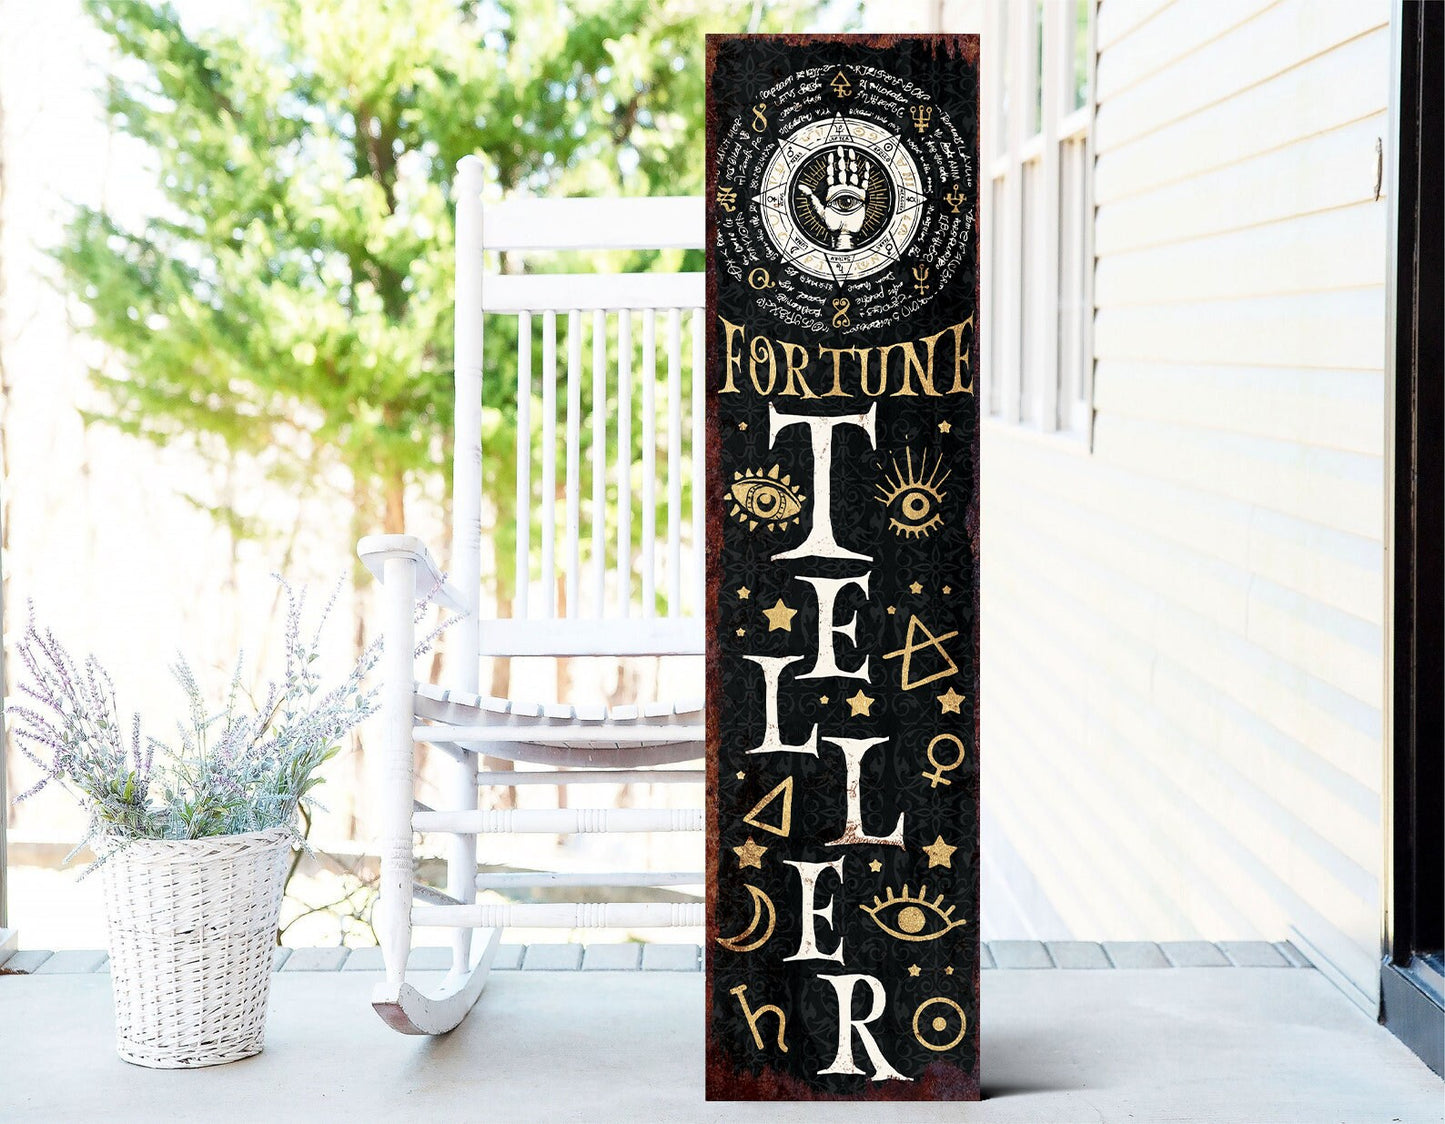 36in Fortune Teller Halloween Porch Sign - Front Porch Halloween Welcome Sign with Vintage Decoration, Rustic Farmhouse Entryway Porch Decor